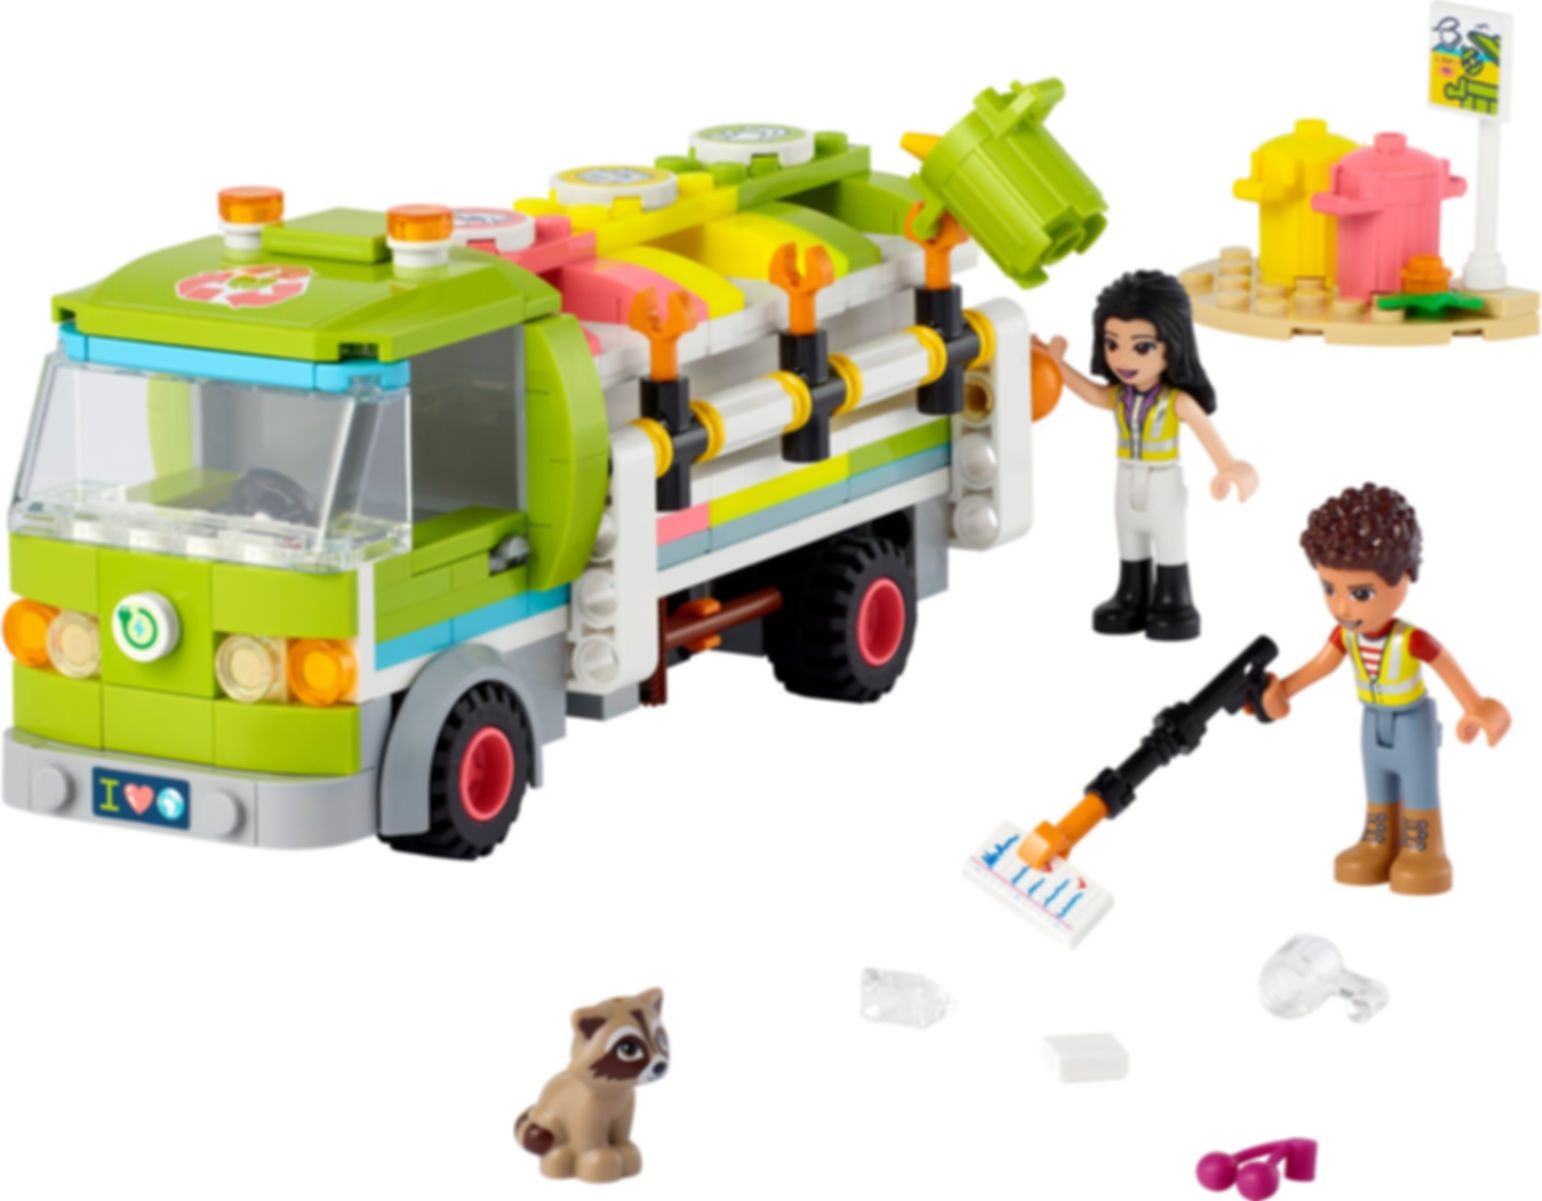 LEGO® Friends Le camion de recyclage gameplay